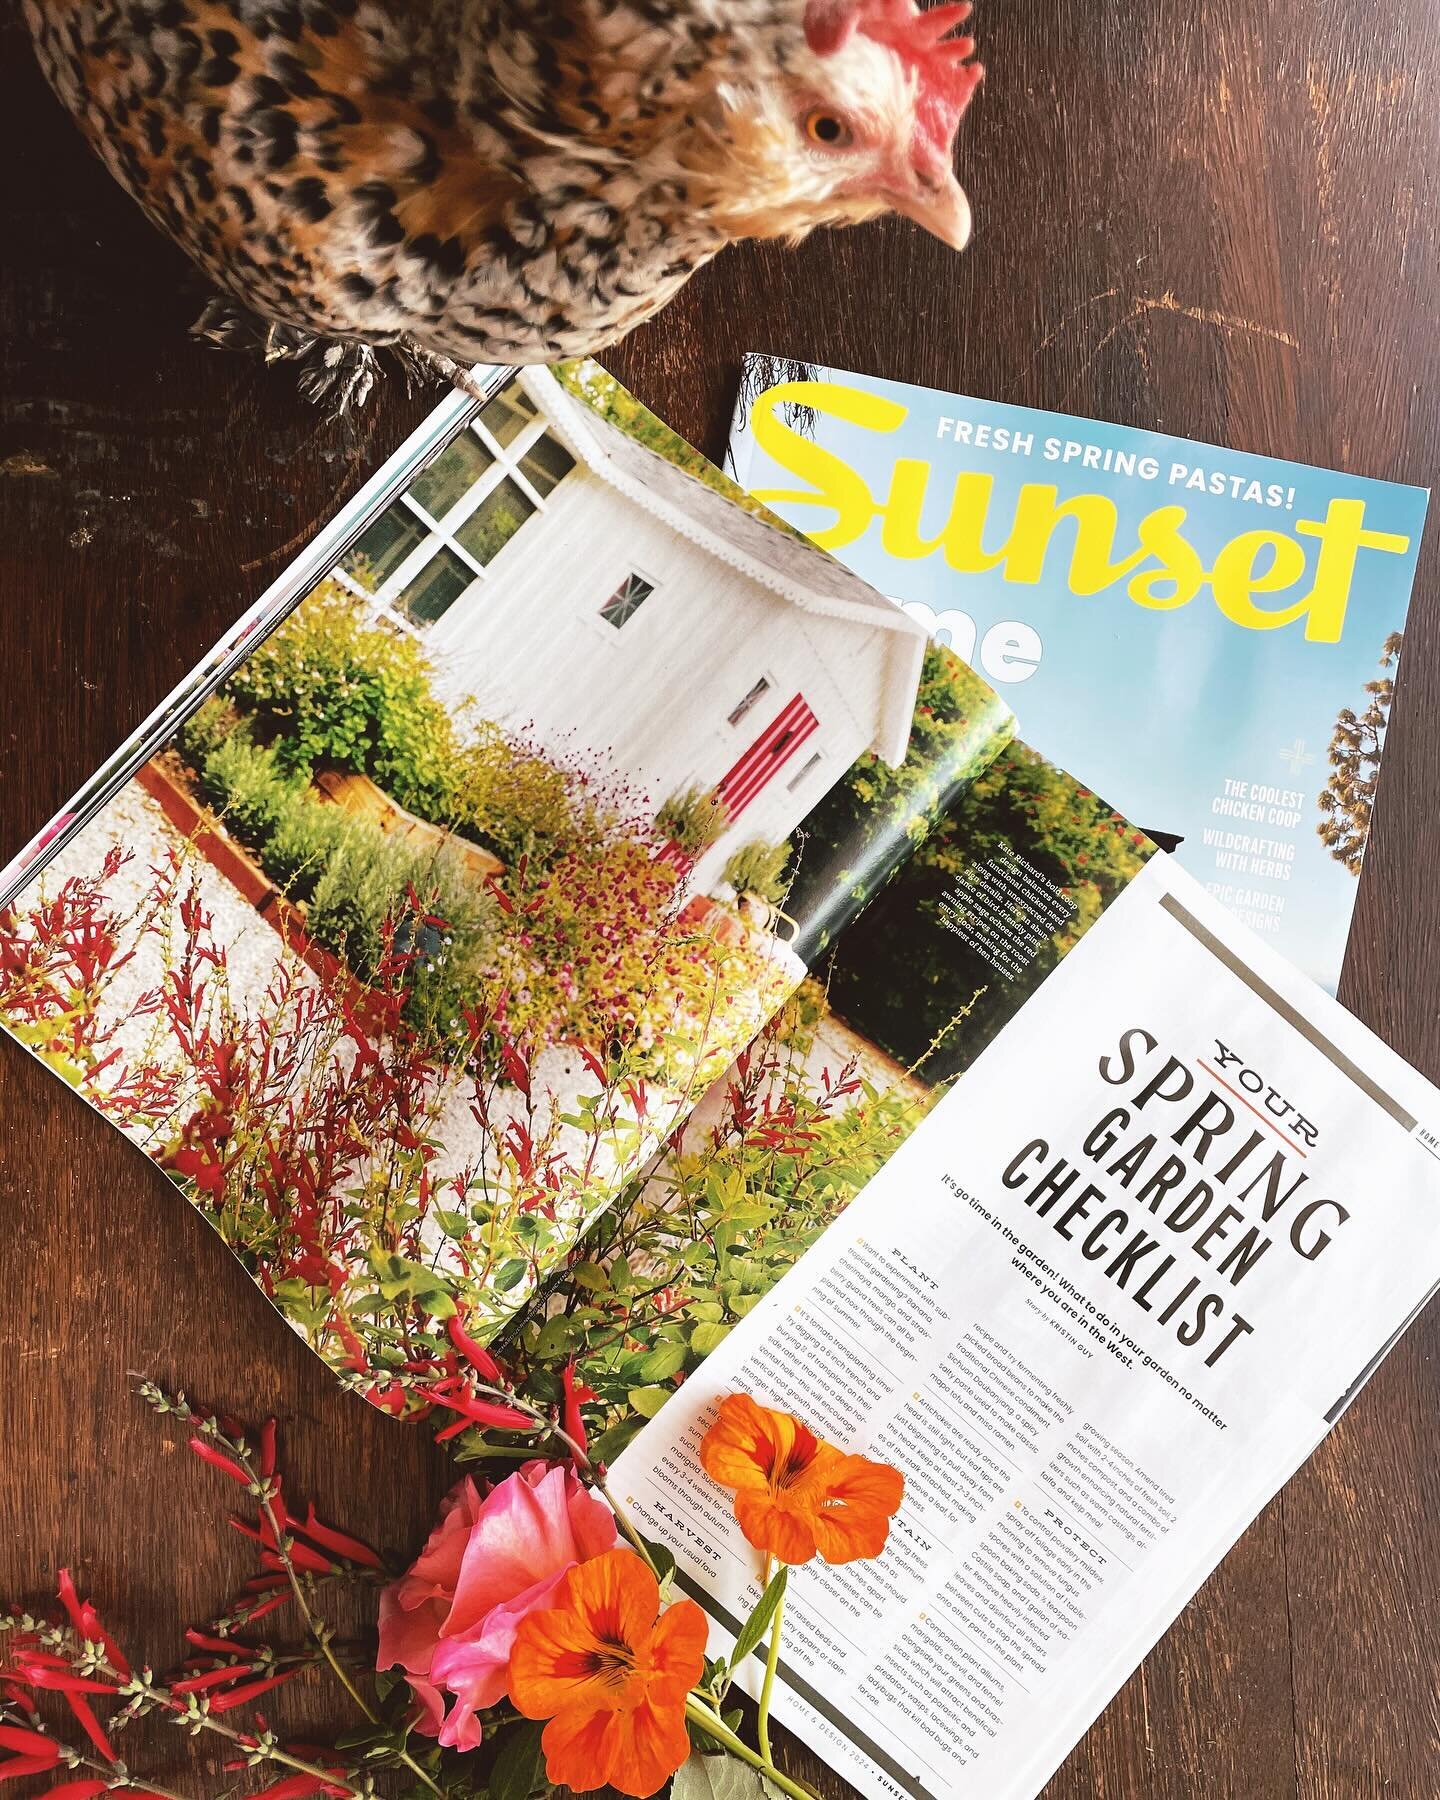 I am just beside myself to see our coop and chicken-friendly garden featured in the latest issue of @sunsetmag . They're on newsstands now--go get you one if you haven't already!
Big thanks and hugs to @tendingwest for the lovely article!!!
And shout